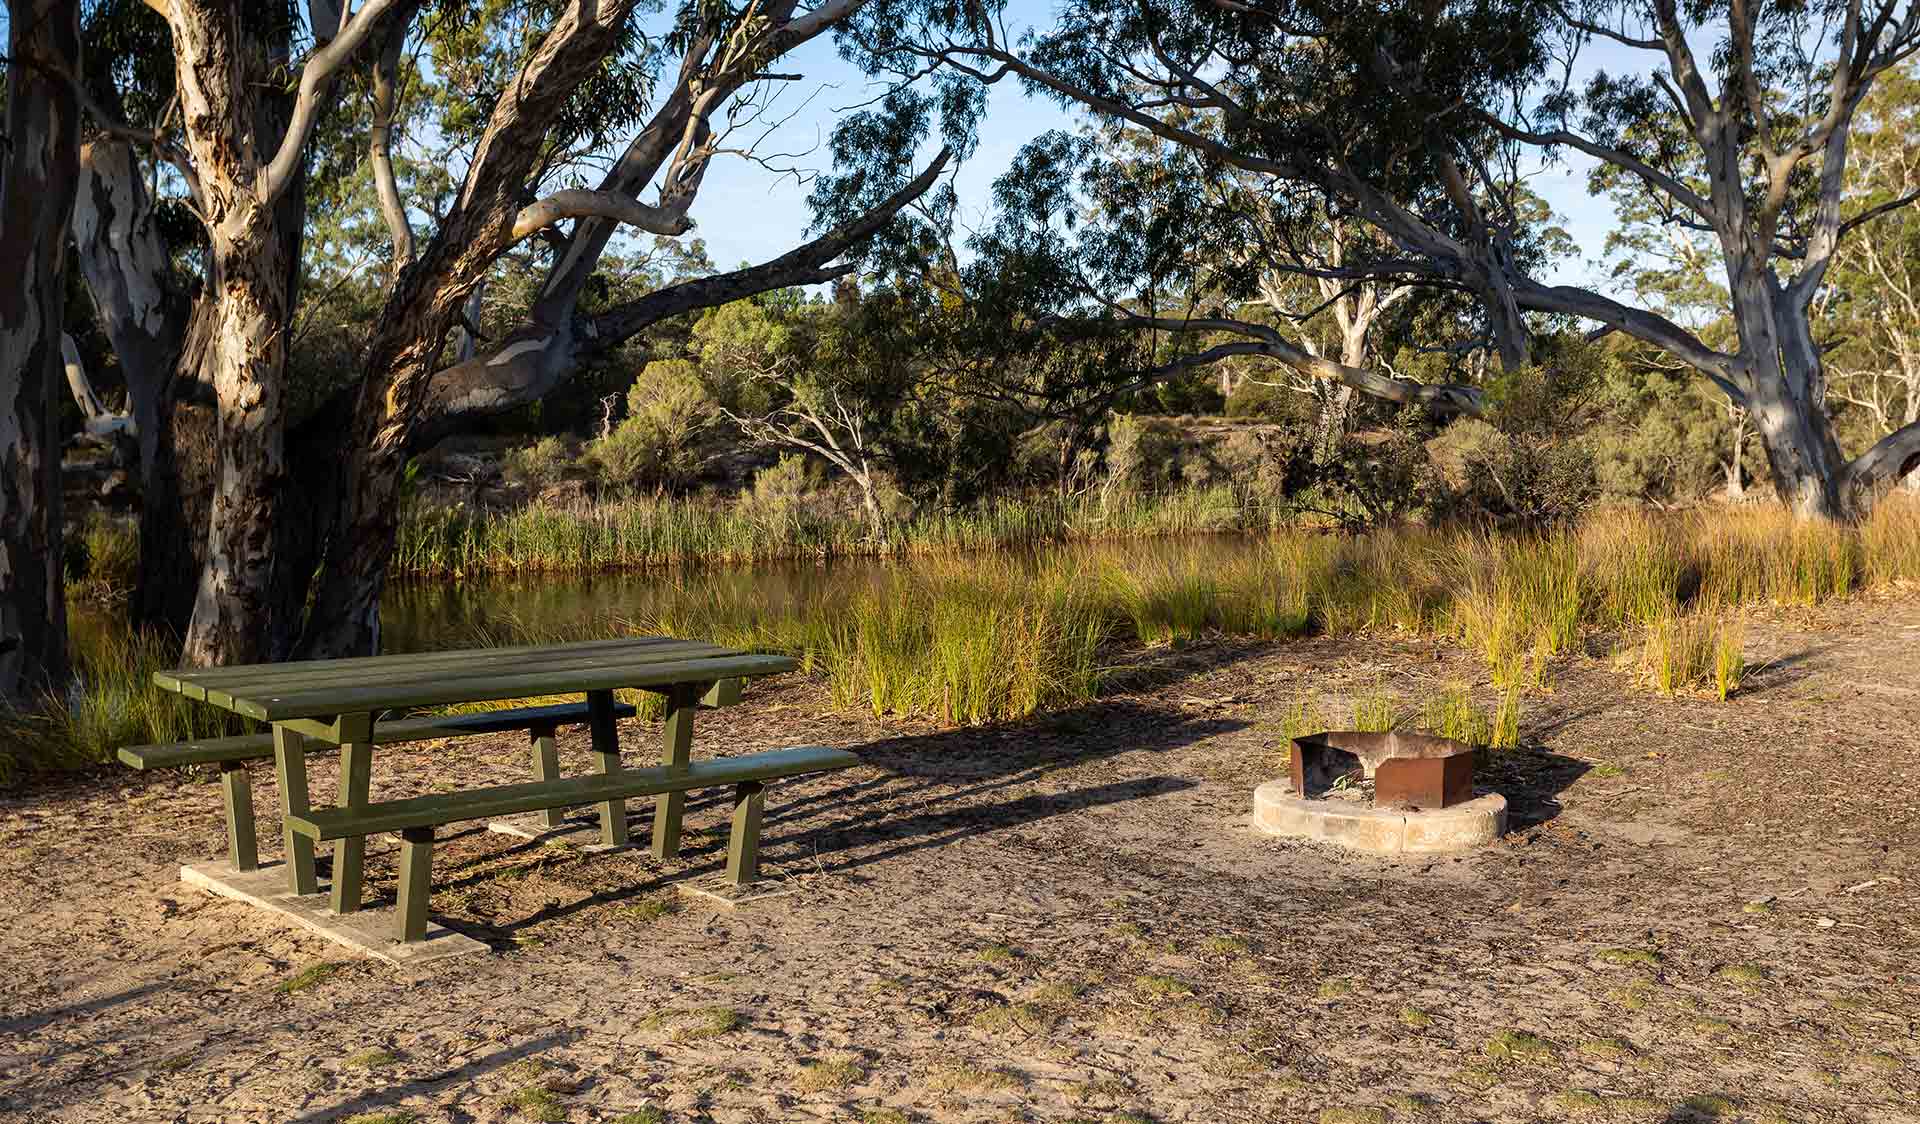 A campfire and picnic table near the river's edge at Ackle Bend Campground in Little Desert National Park